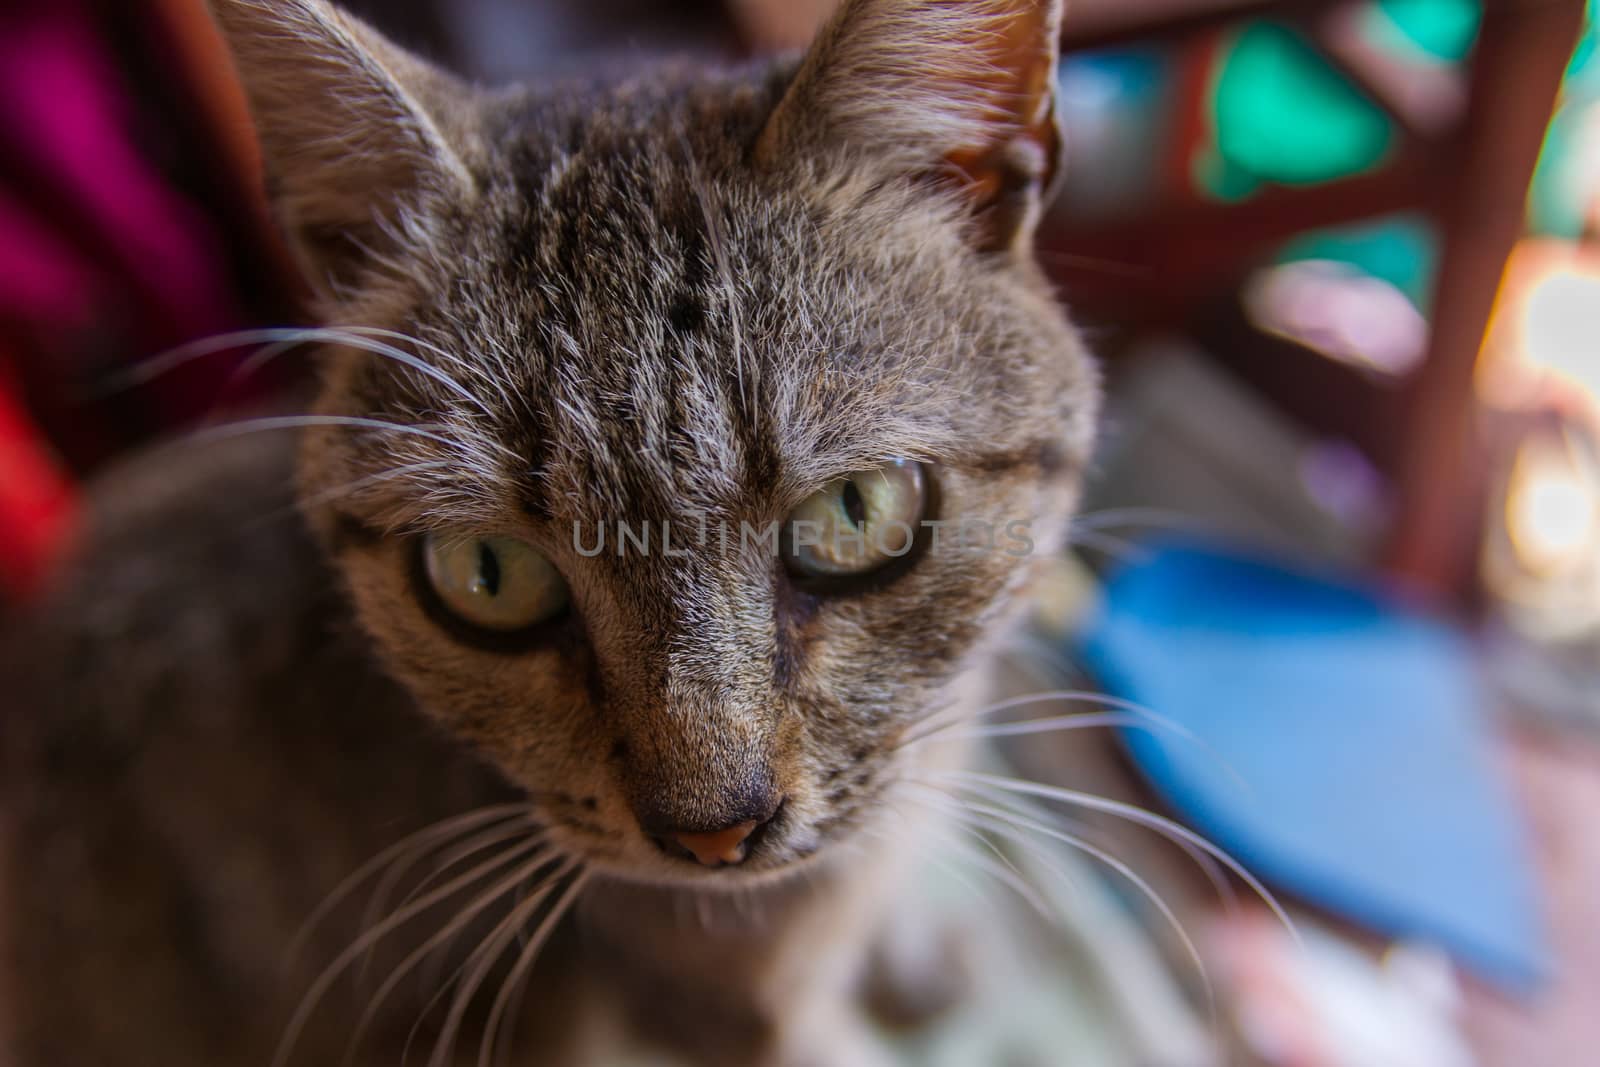 Homeless cat closeup photo with soft focus and blurred backgroun by alexsdriver